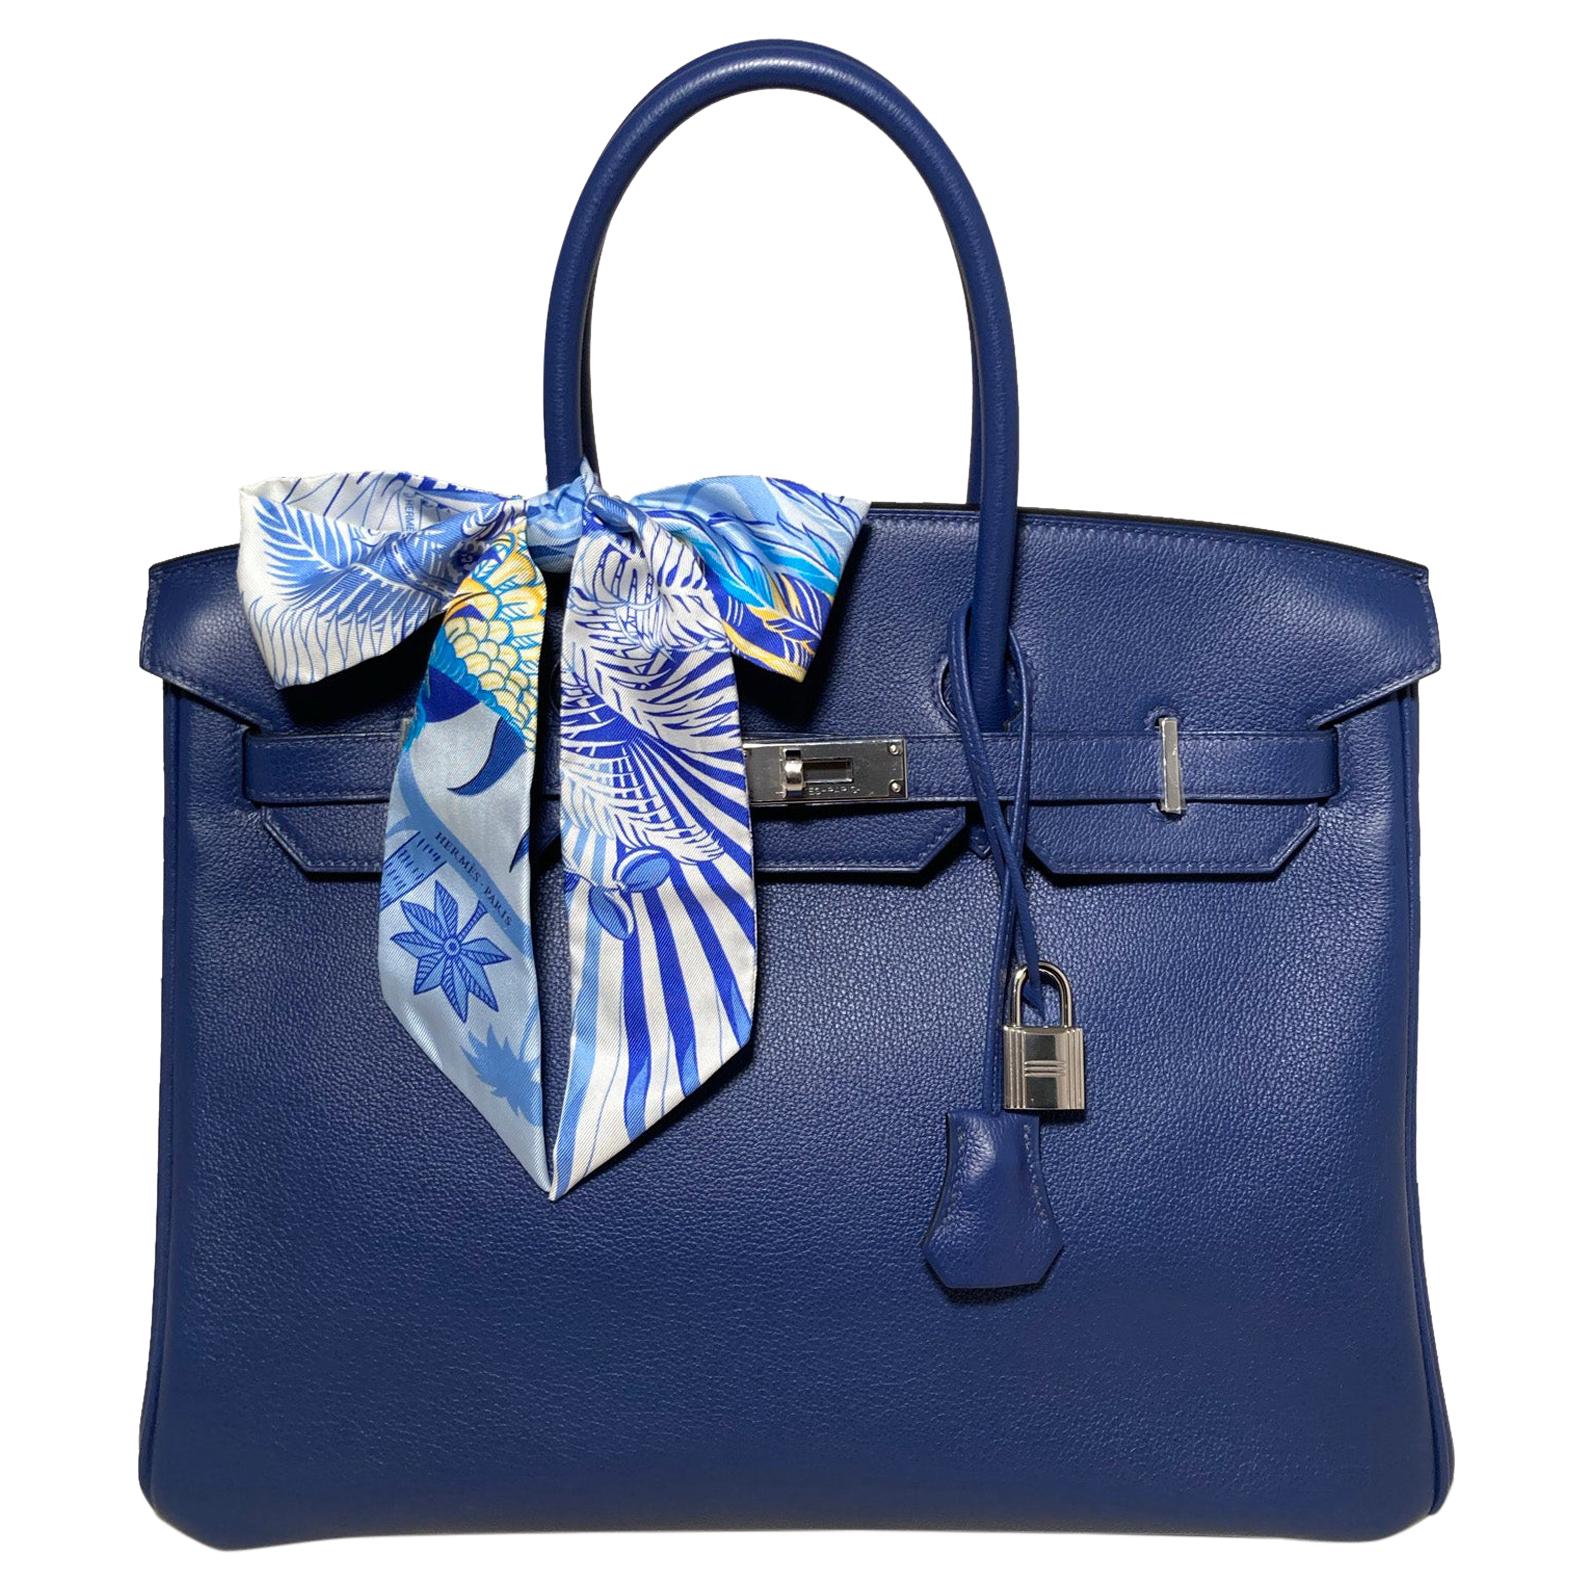 Sold at Auction: Hermes Birkin 25 Bag, Blue Sapphire Swift Leather